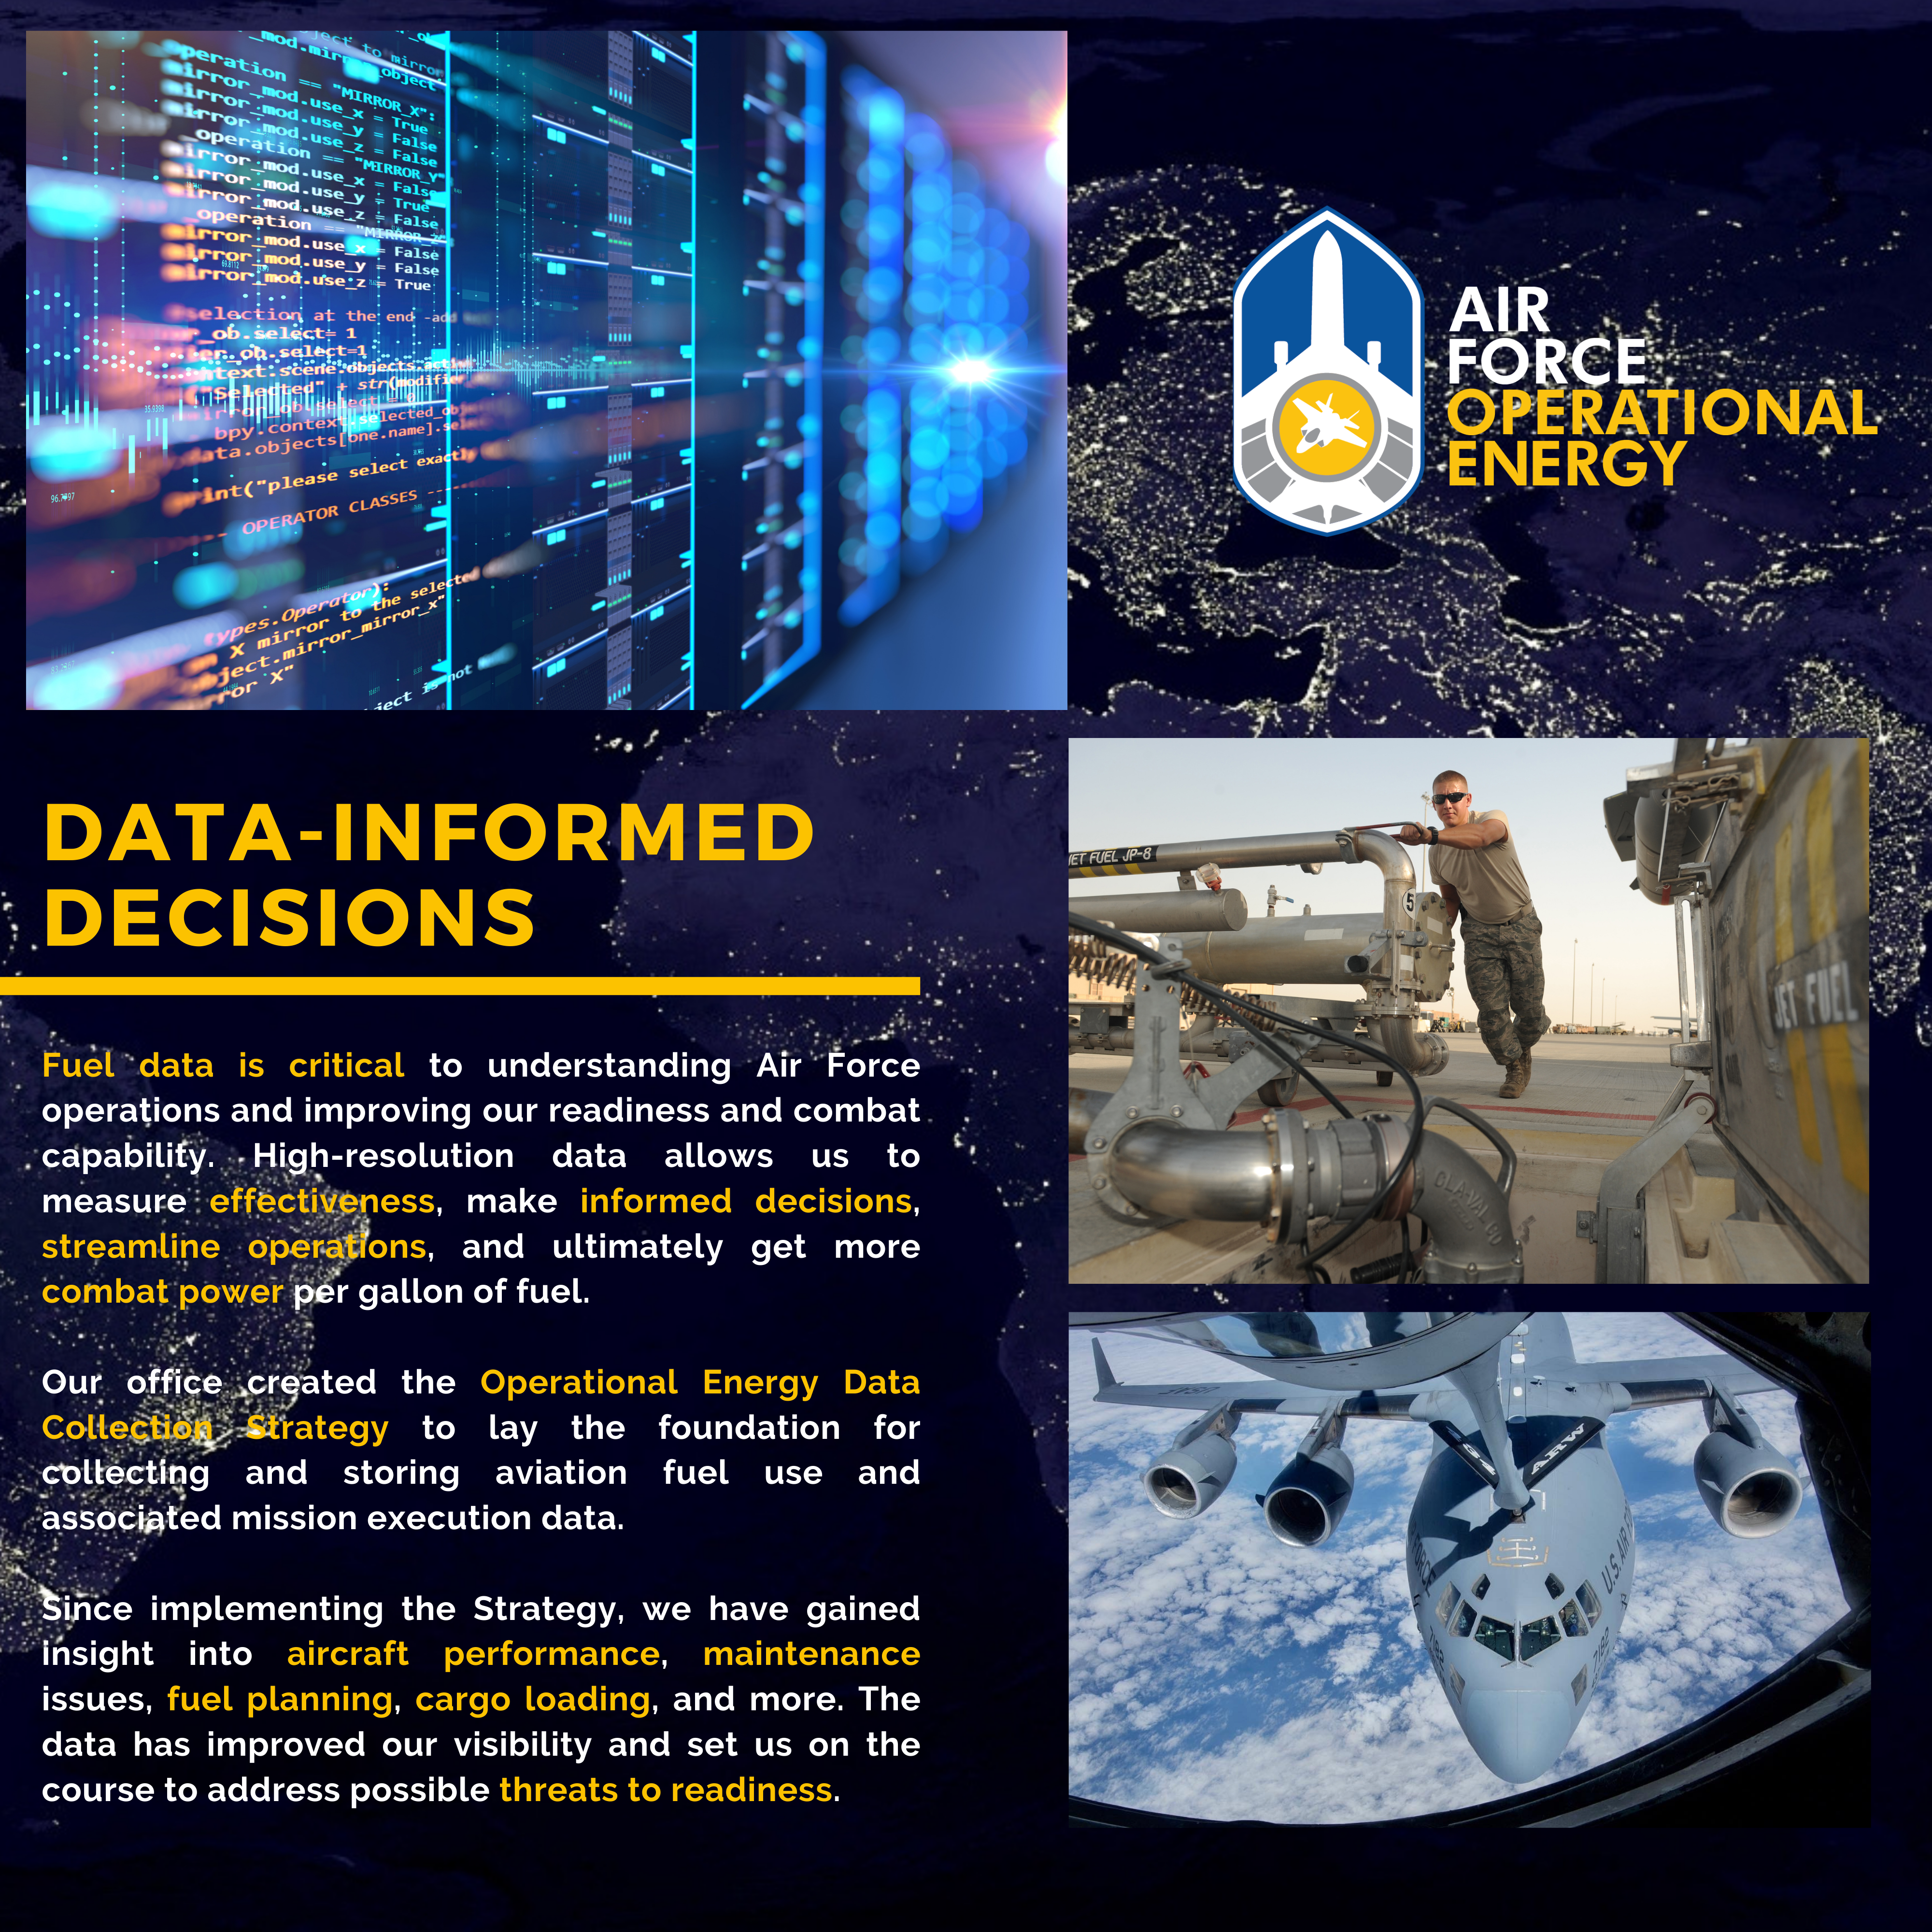 Data-Informed Decisions